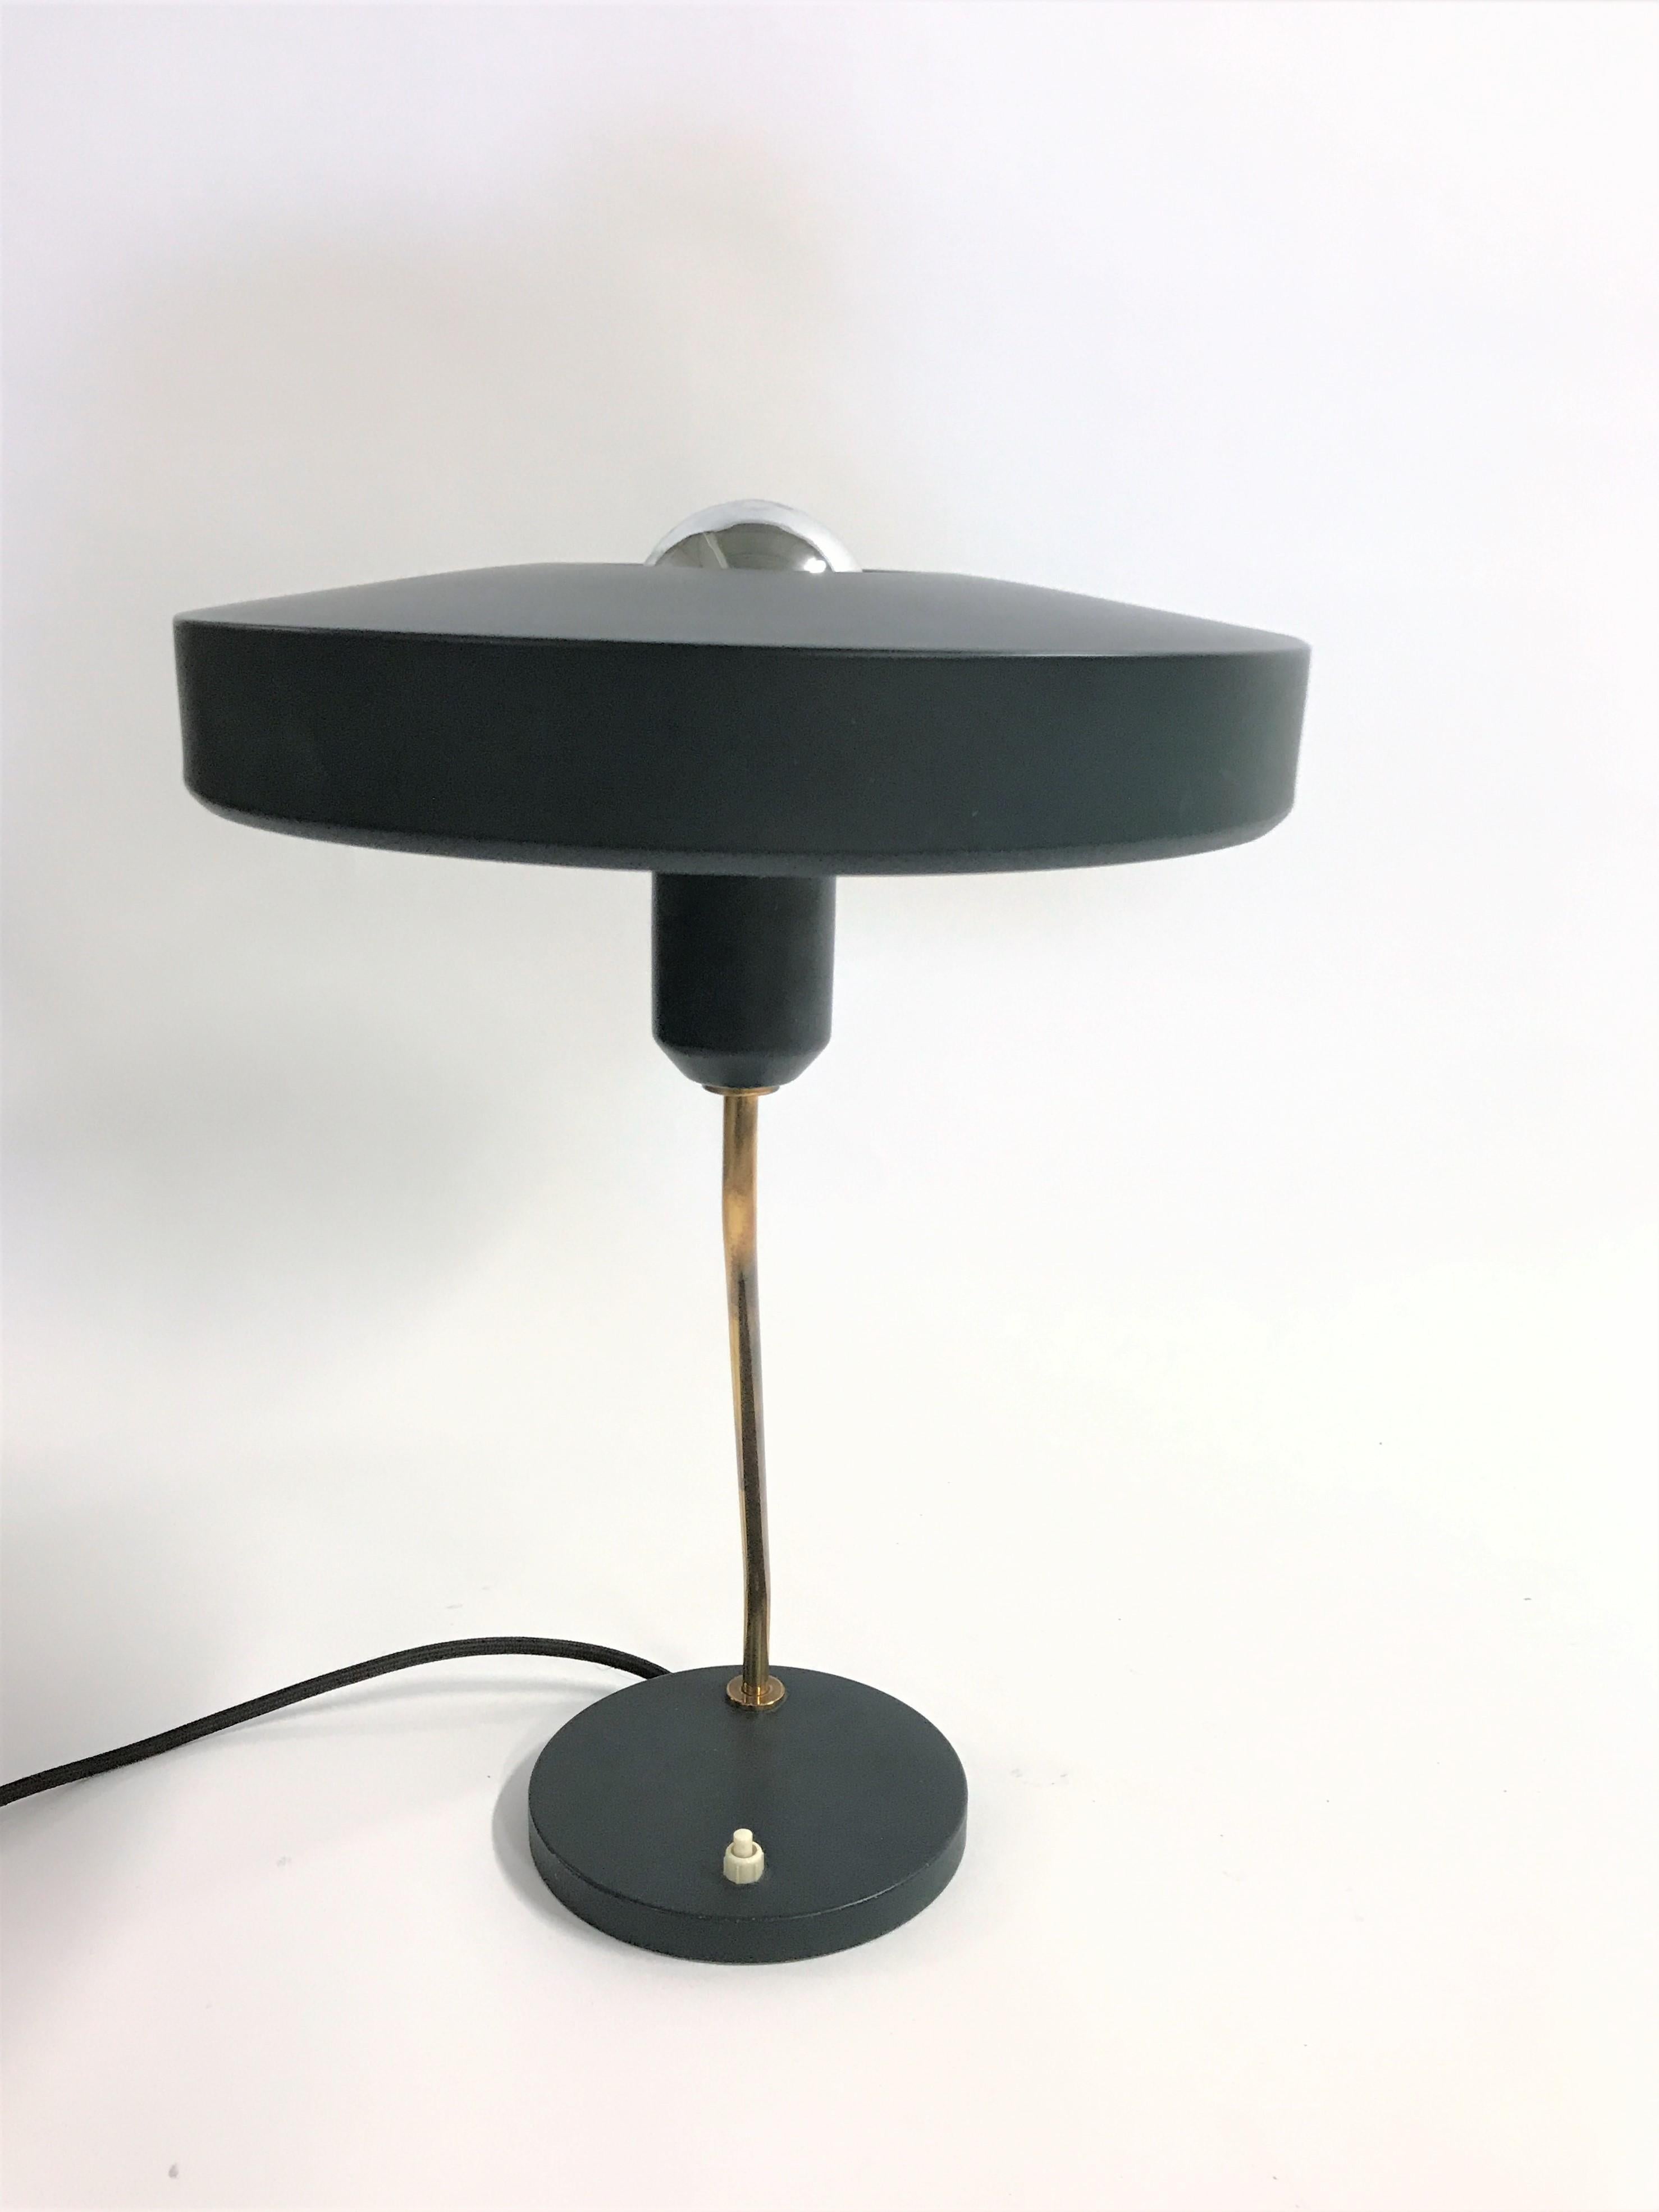 Louis Kalff for Philips desk lamp model 'Romeo'

This 'zigzag' shaped table lamp has a brass rod and has an fine enamelled aluminum lamp shade.

Very good condition, rewired and tested for use. To be used with a regular E27 light bulb.

Works